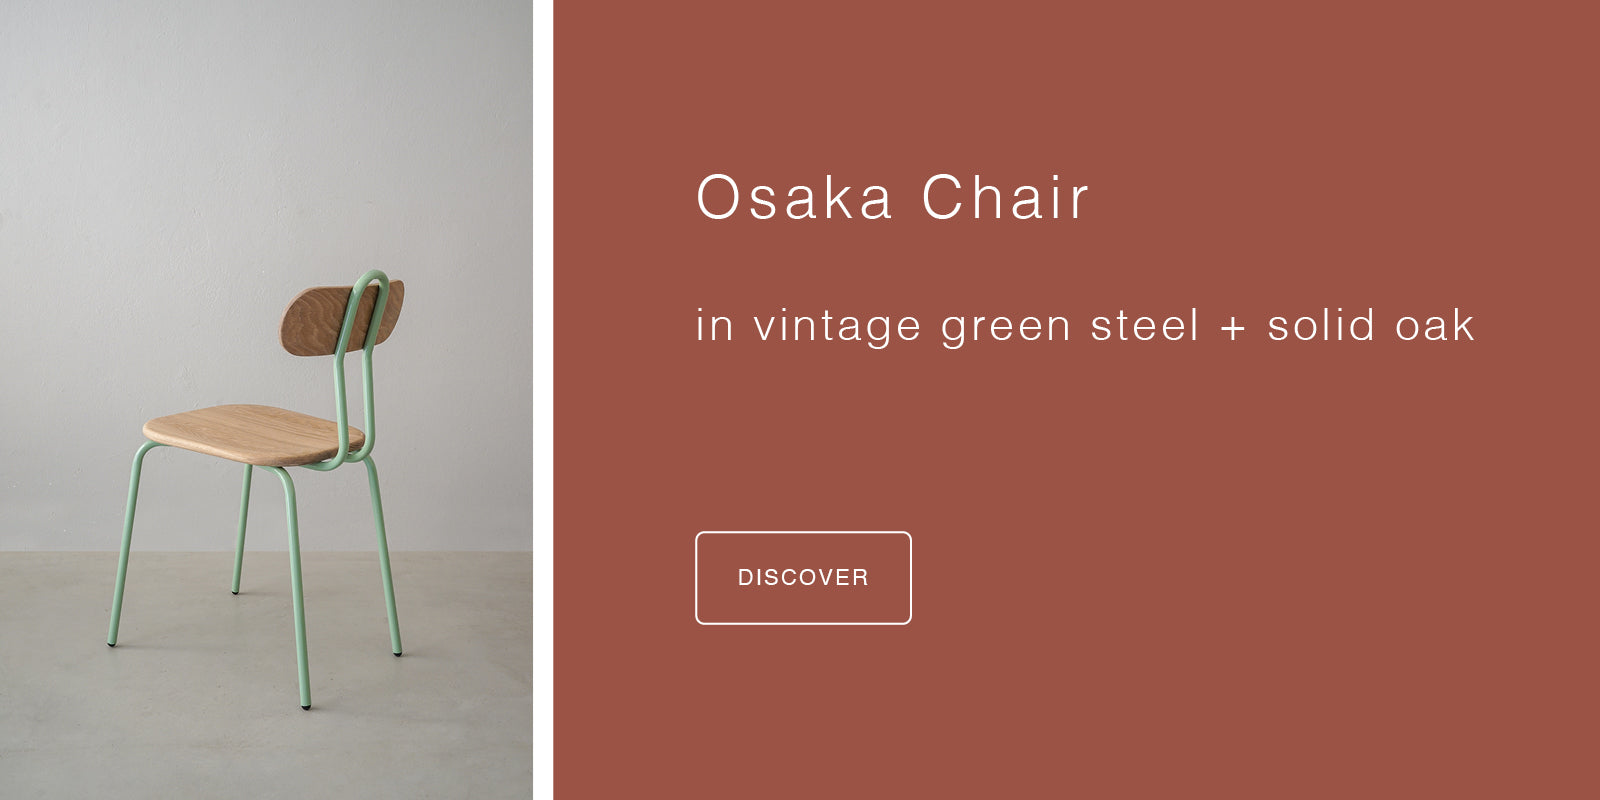 Osaka Chair in Vintage Green